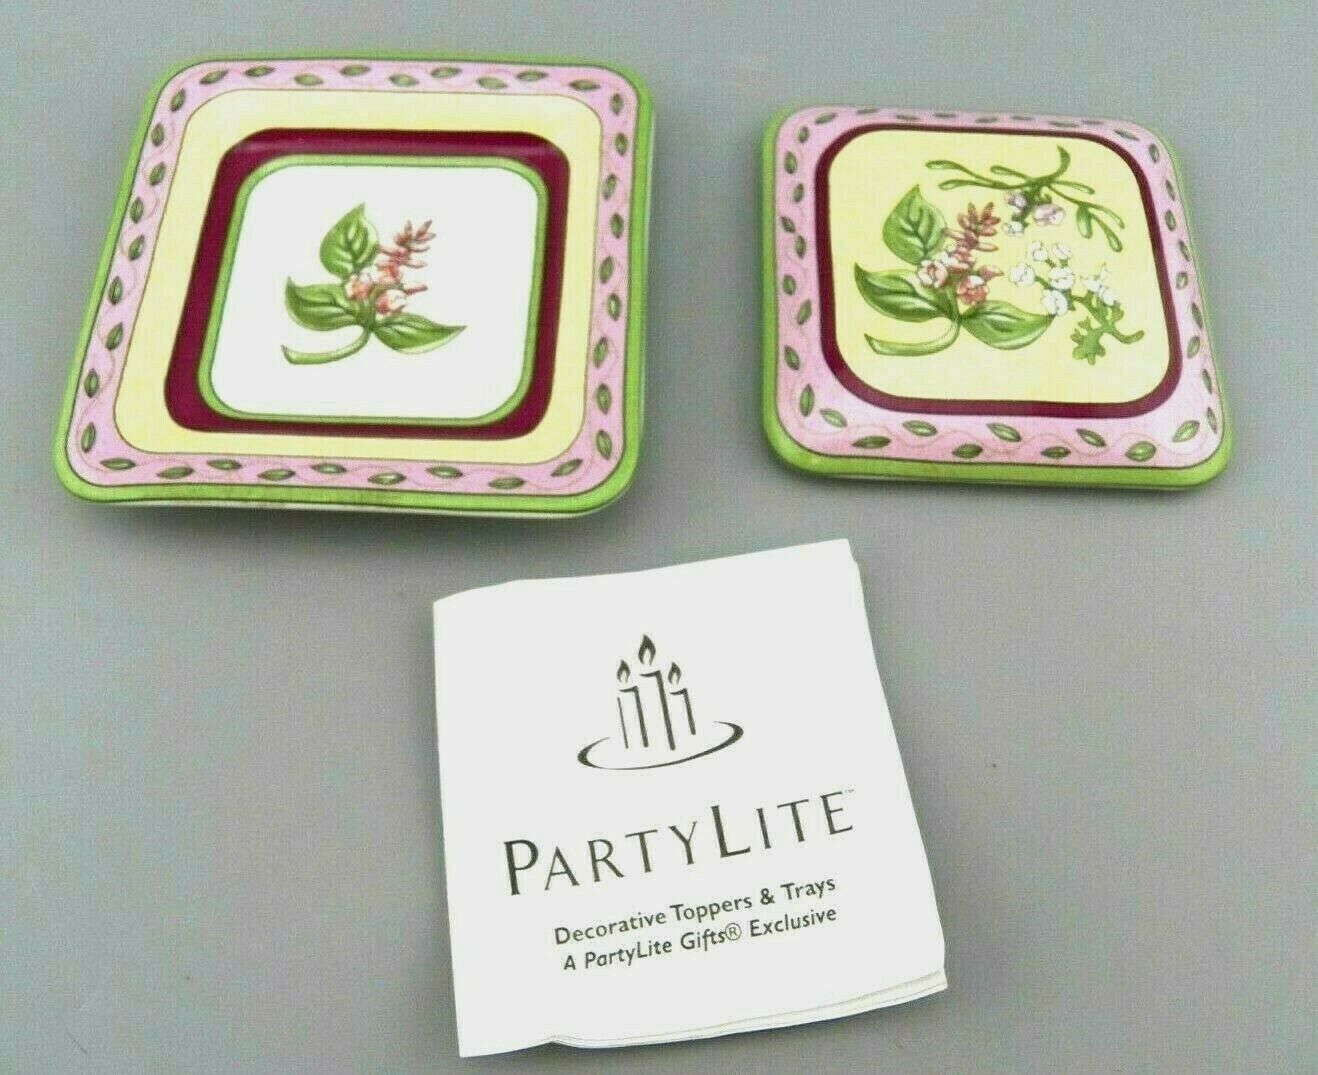 Partylite Fusions Decorative Topper and Tray Ceramic Candle Holder GUC 